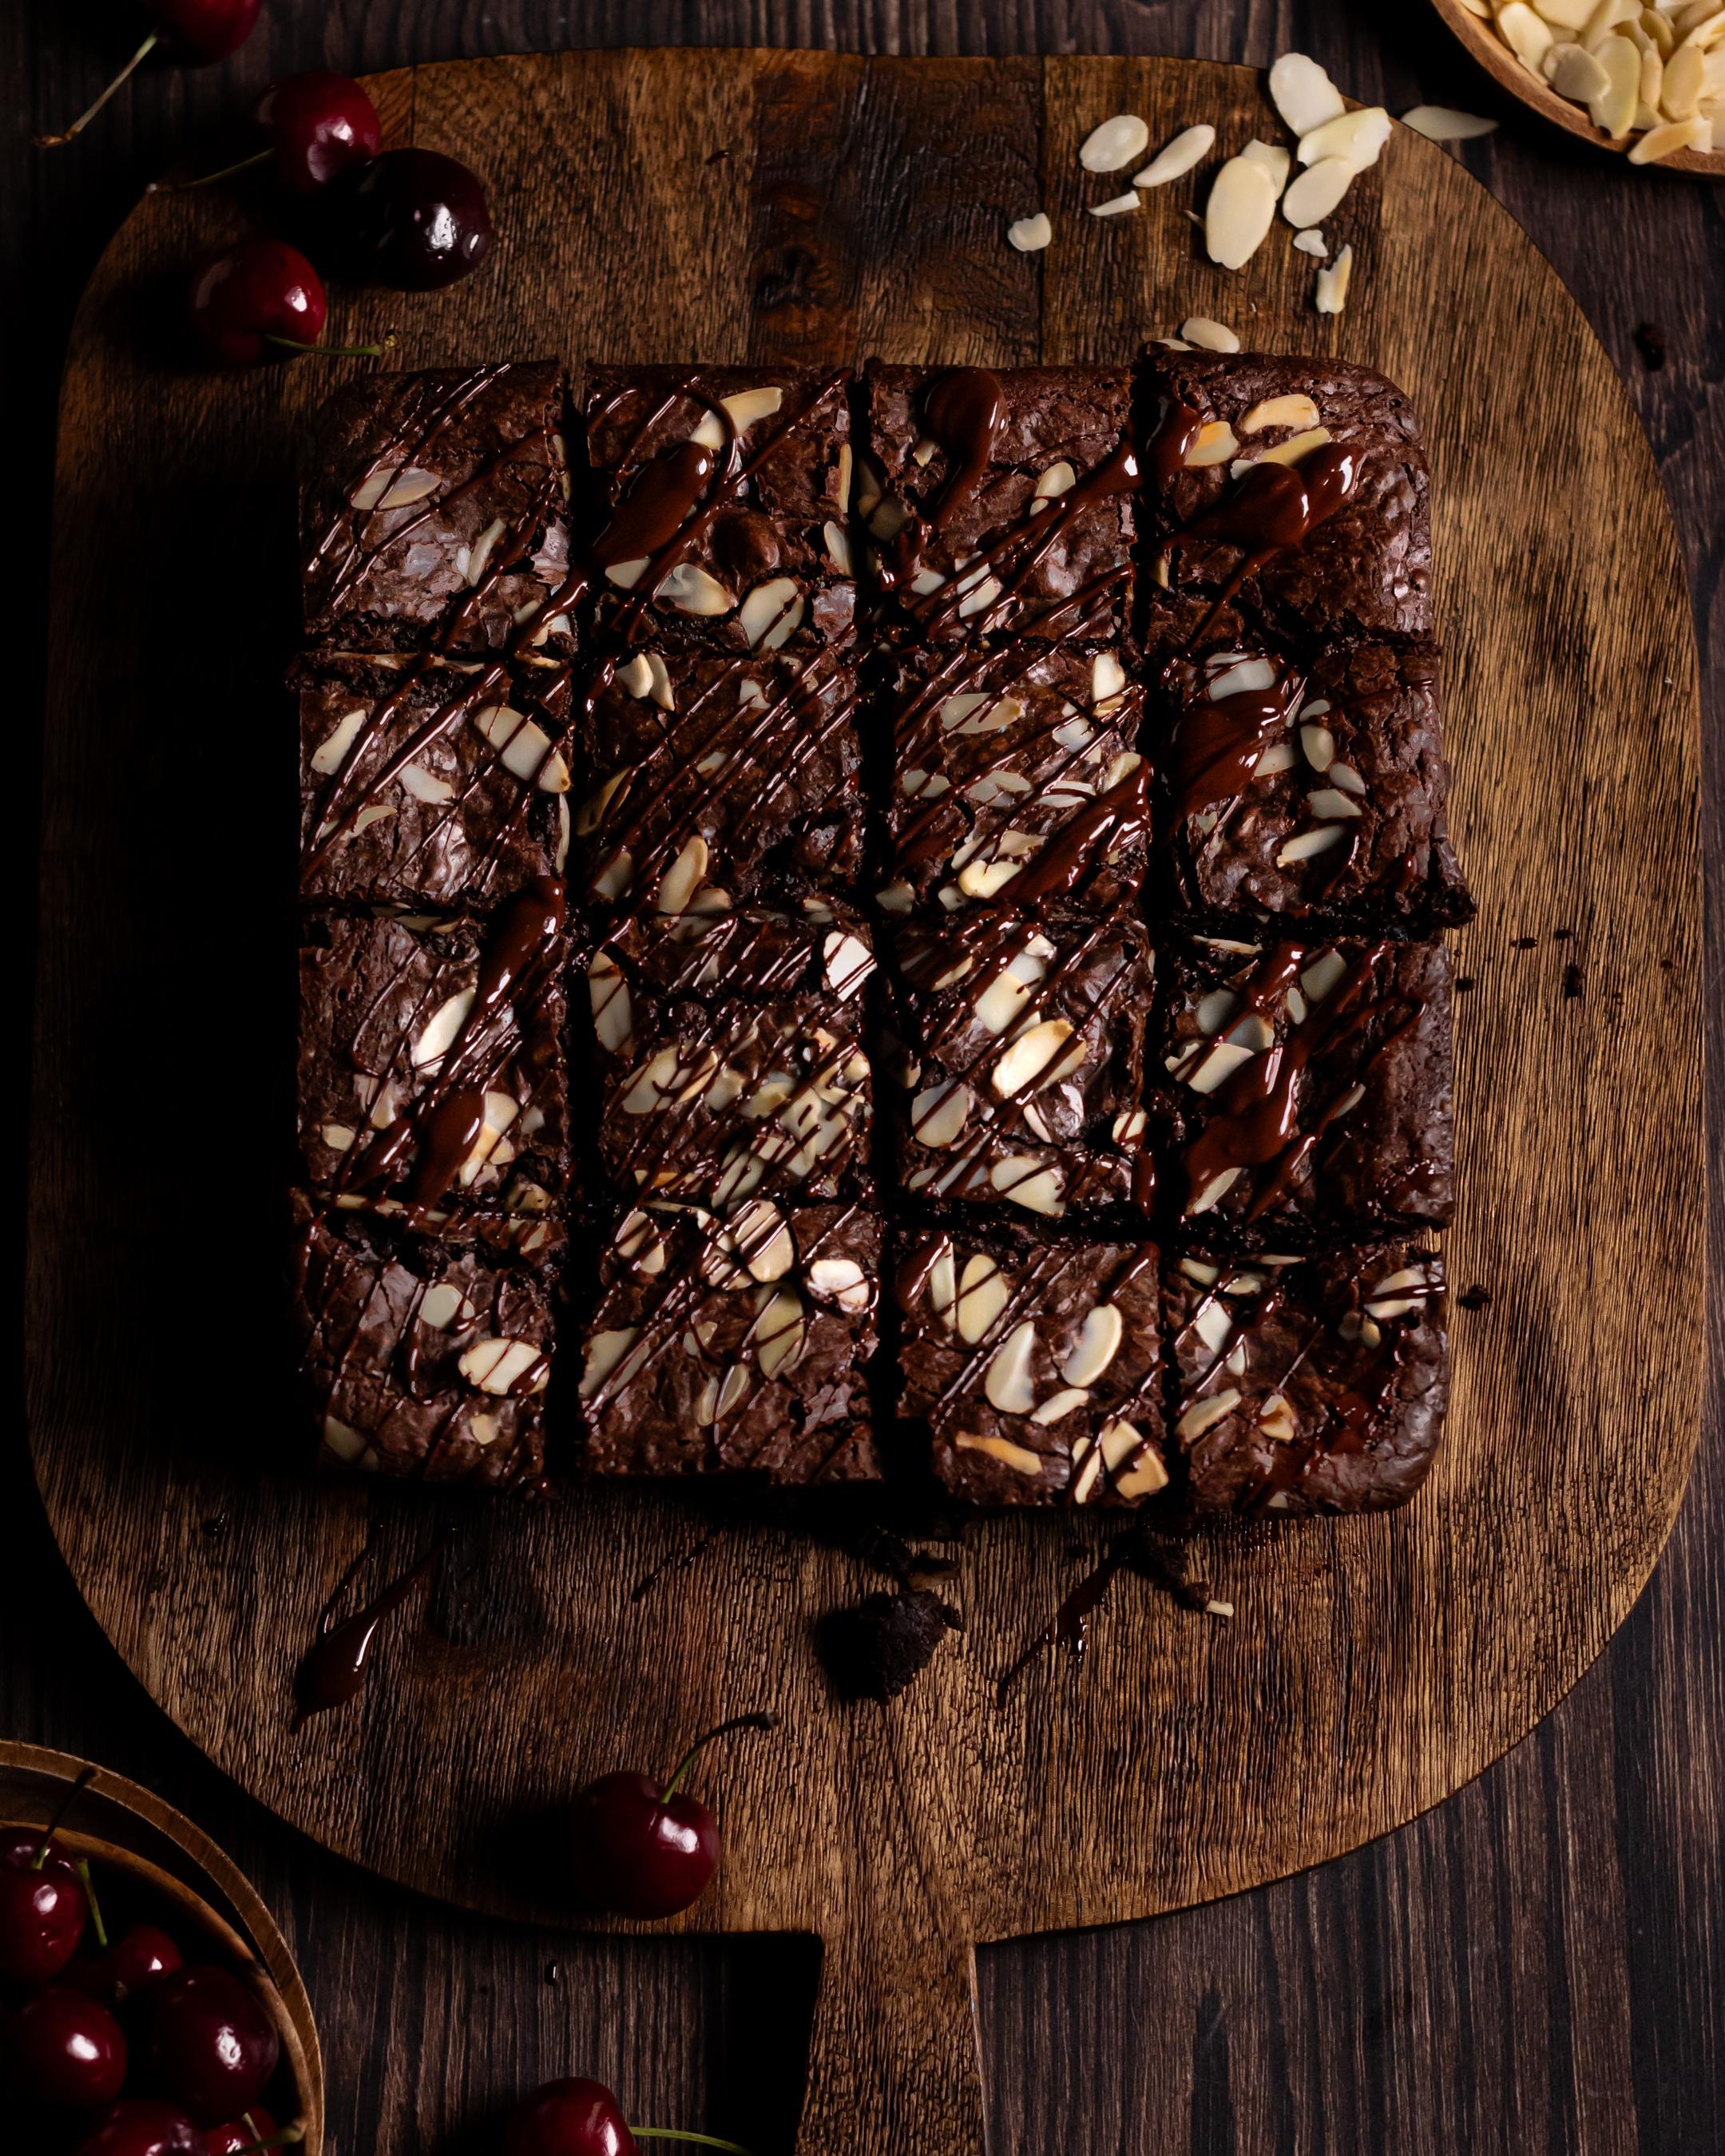 a 16 piece batch of cherry and almond brownies, topped with melted dark chocolate and flaked almonds. Surrounded by fresh cherries and flaked almonds